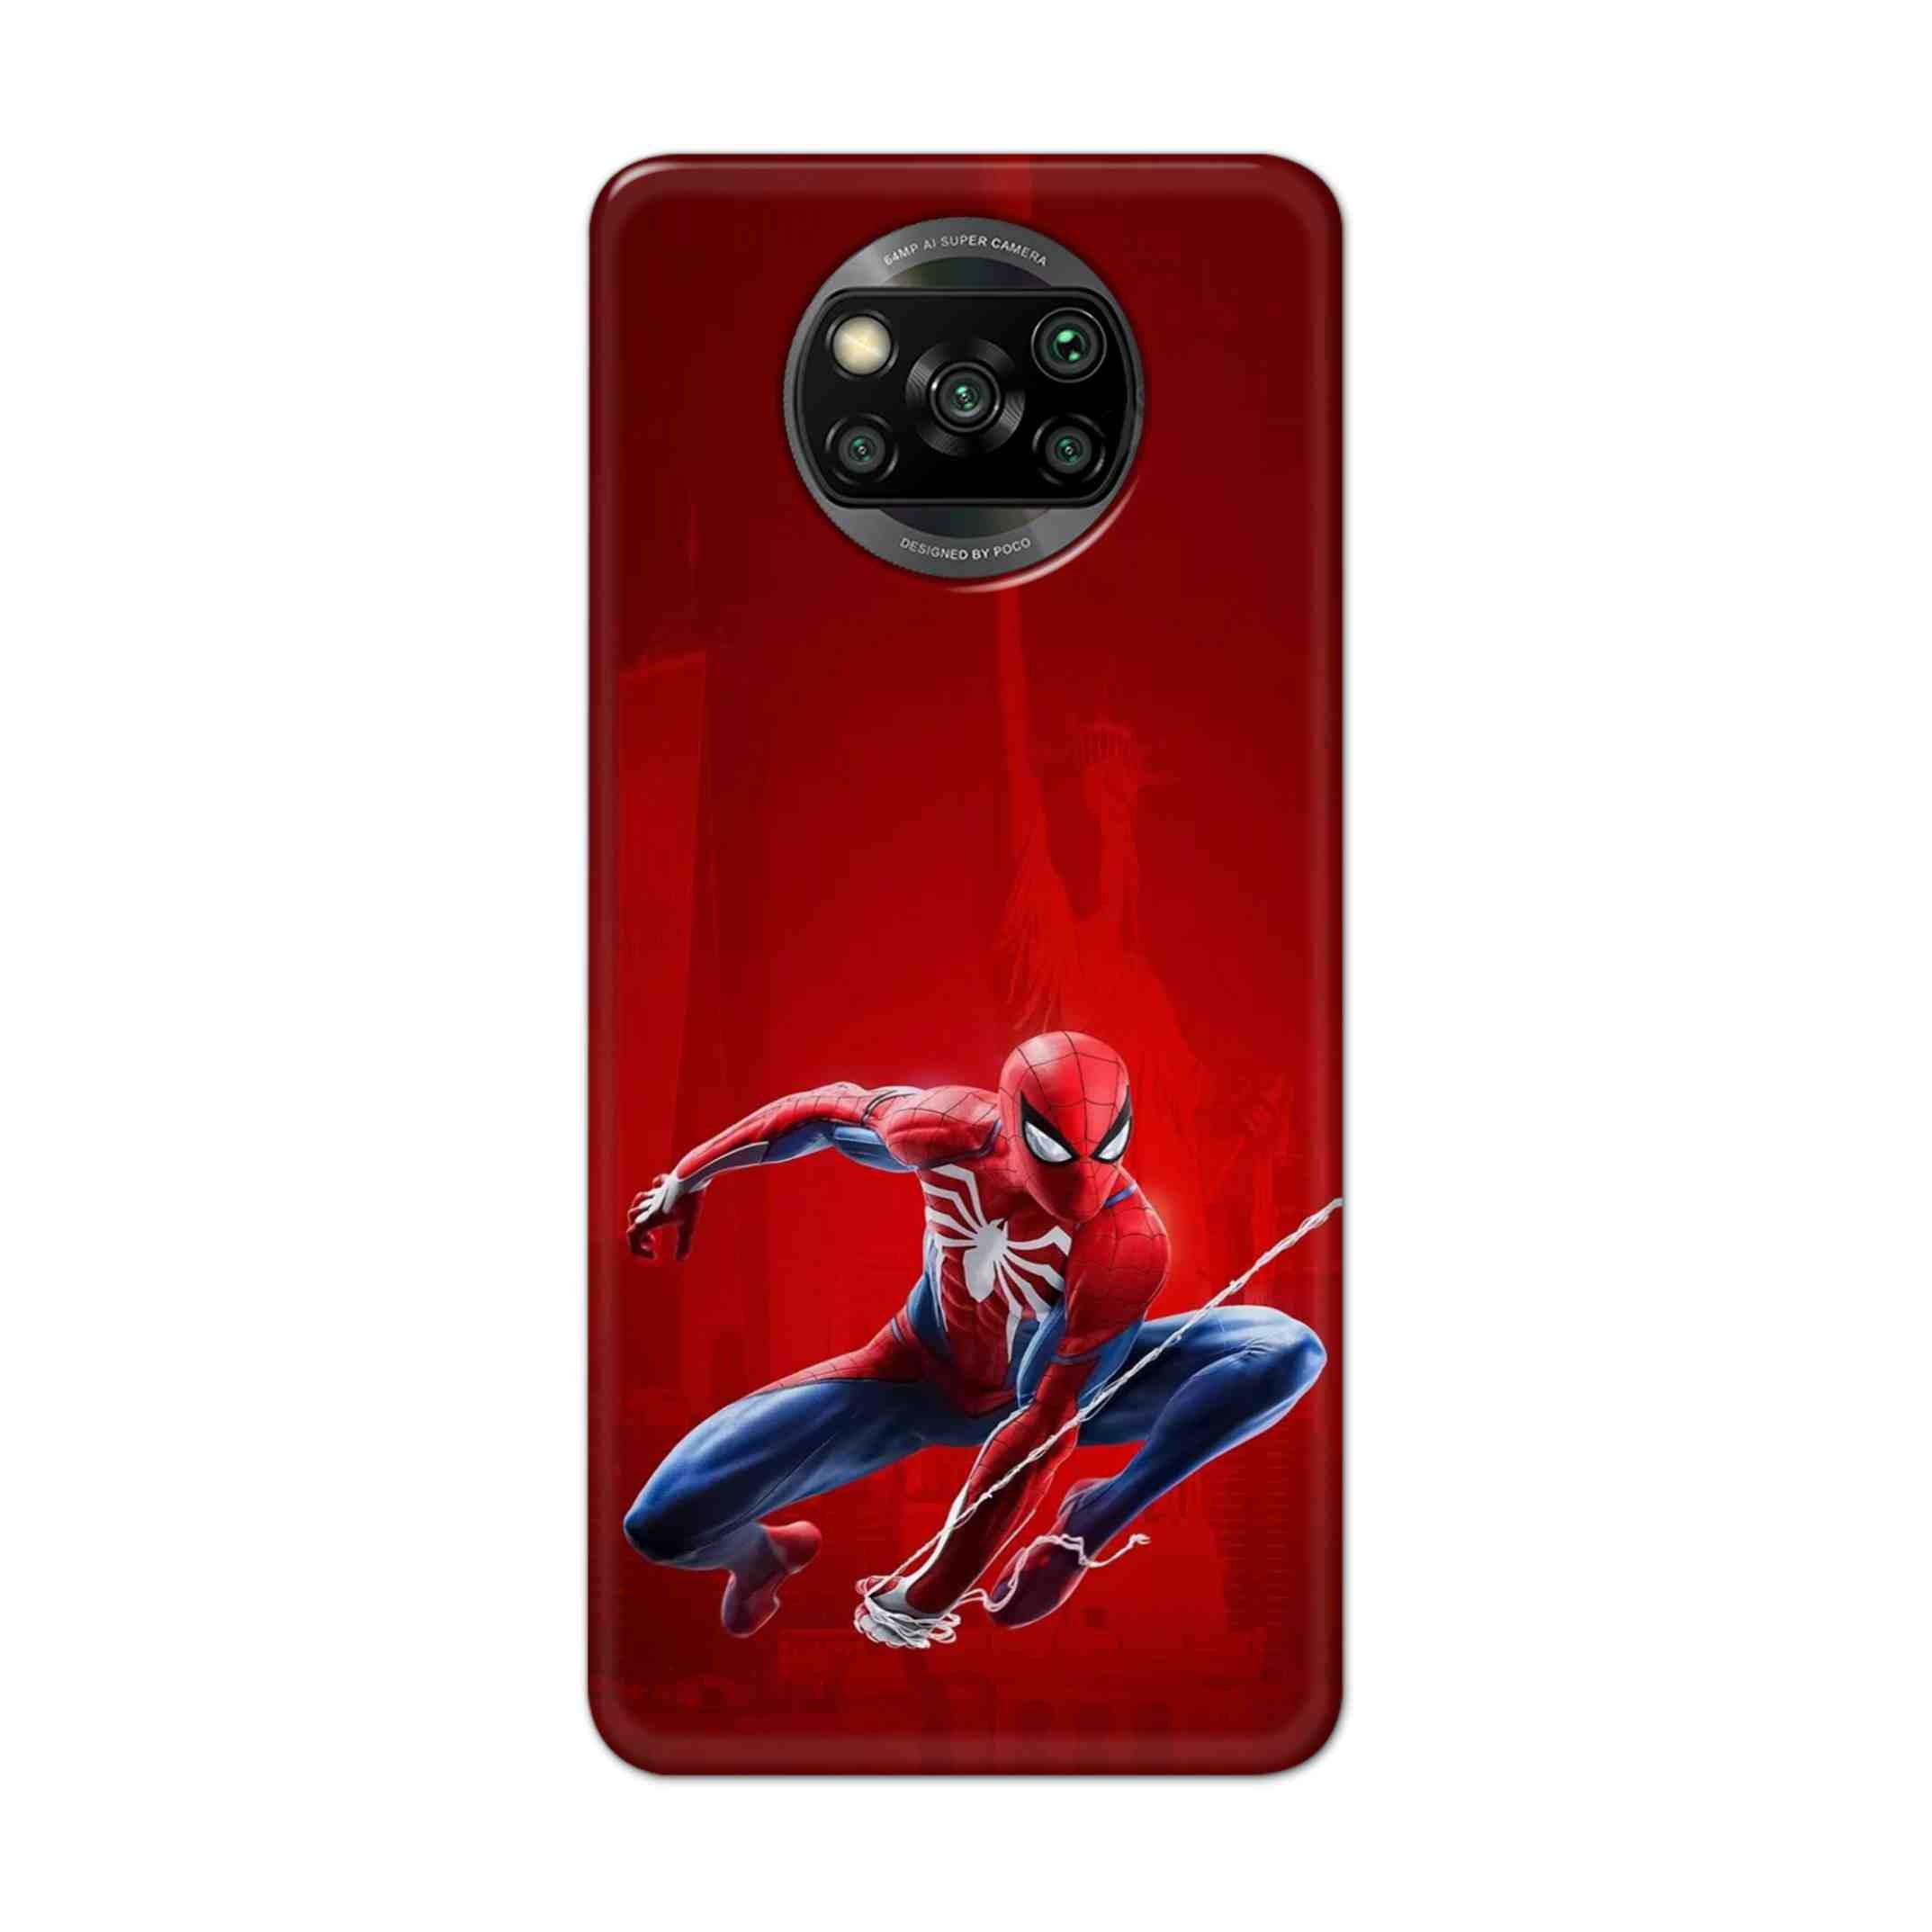 Buy Spiderman Hard Back Mobile Phone Case Cover For Pcoc X3 NFC Online